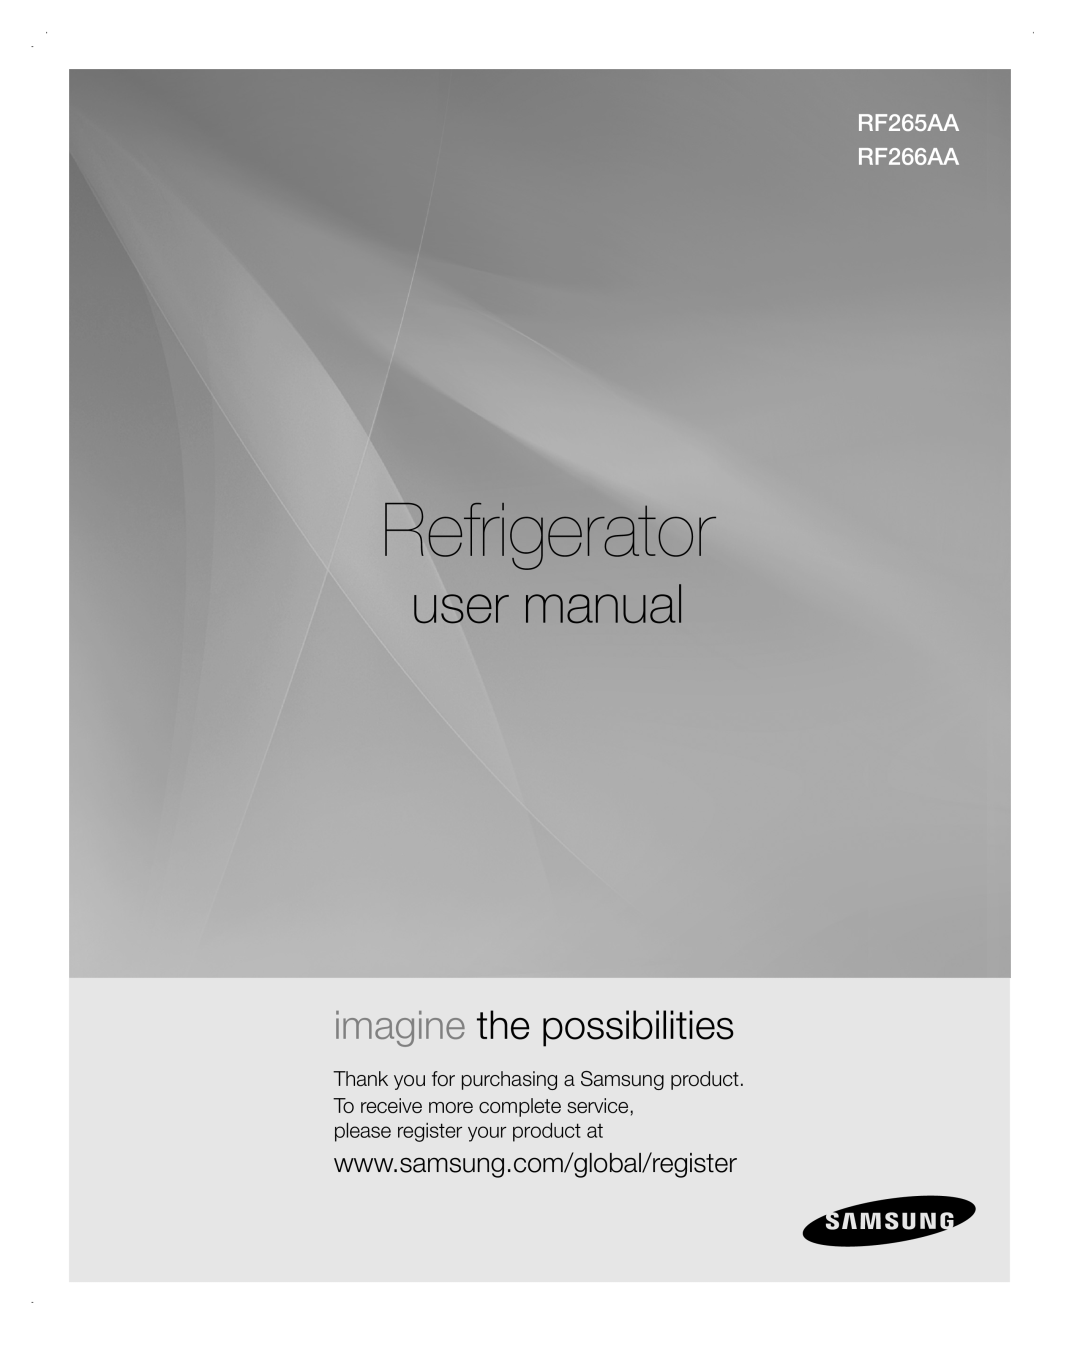 Samsung user manual please register your product at, Refrigerator, imagine the possibilities, RF265AA RF266AA 